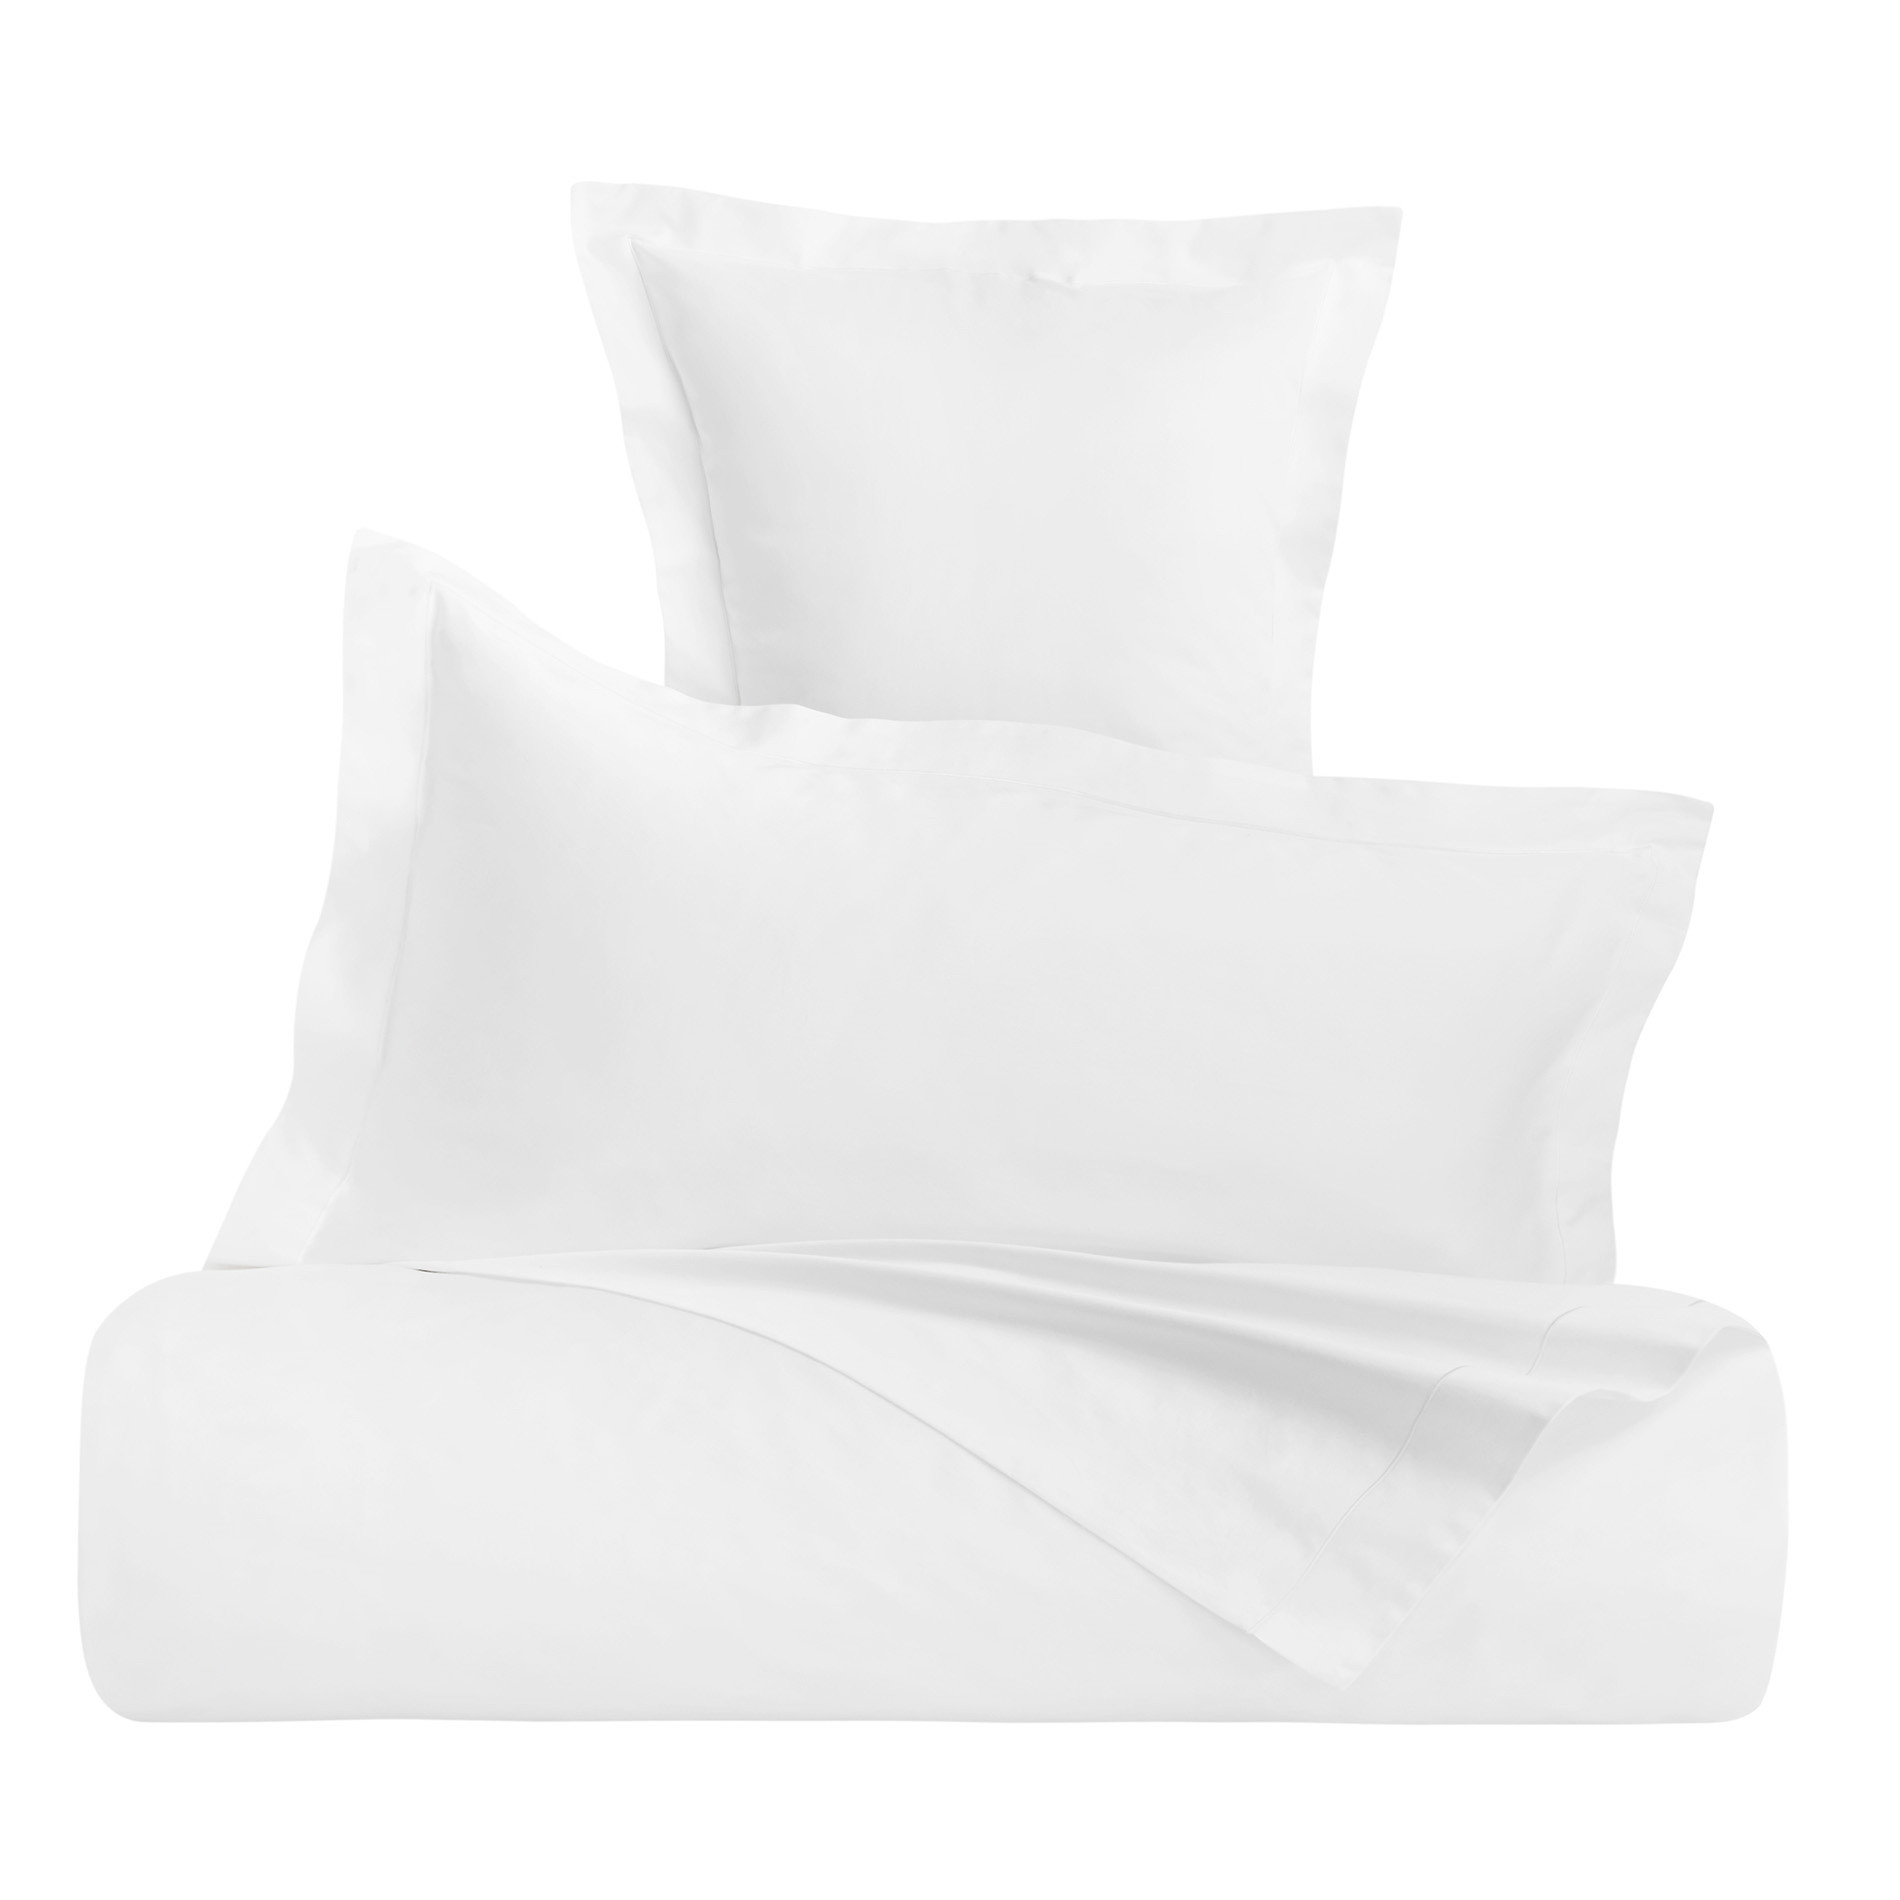 Duvet cover in TC400 satin cotton, White 2, large image number 0